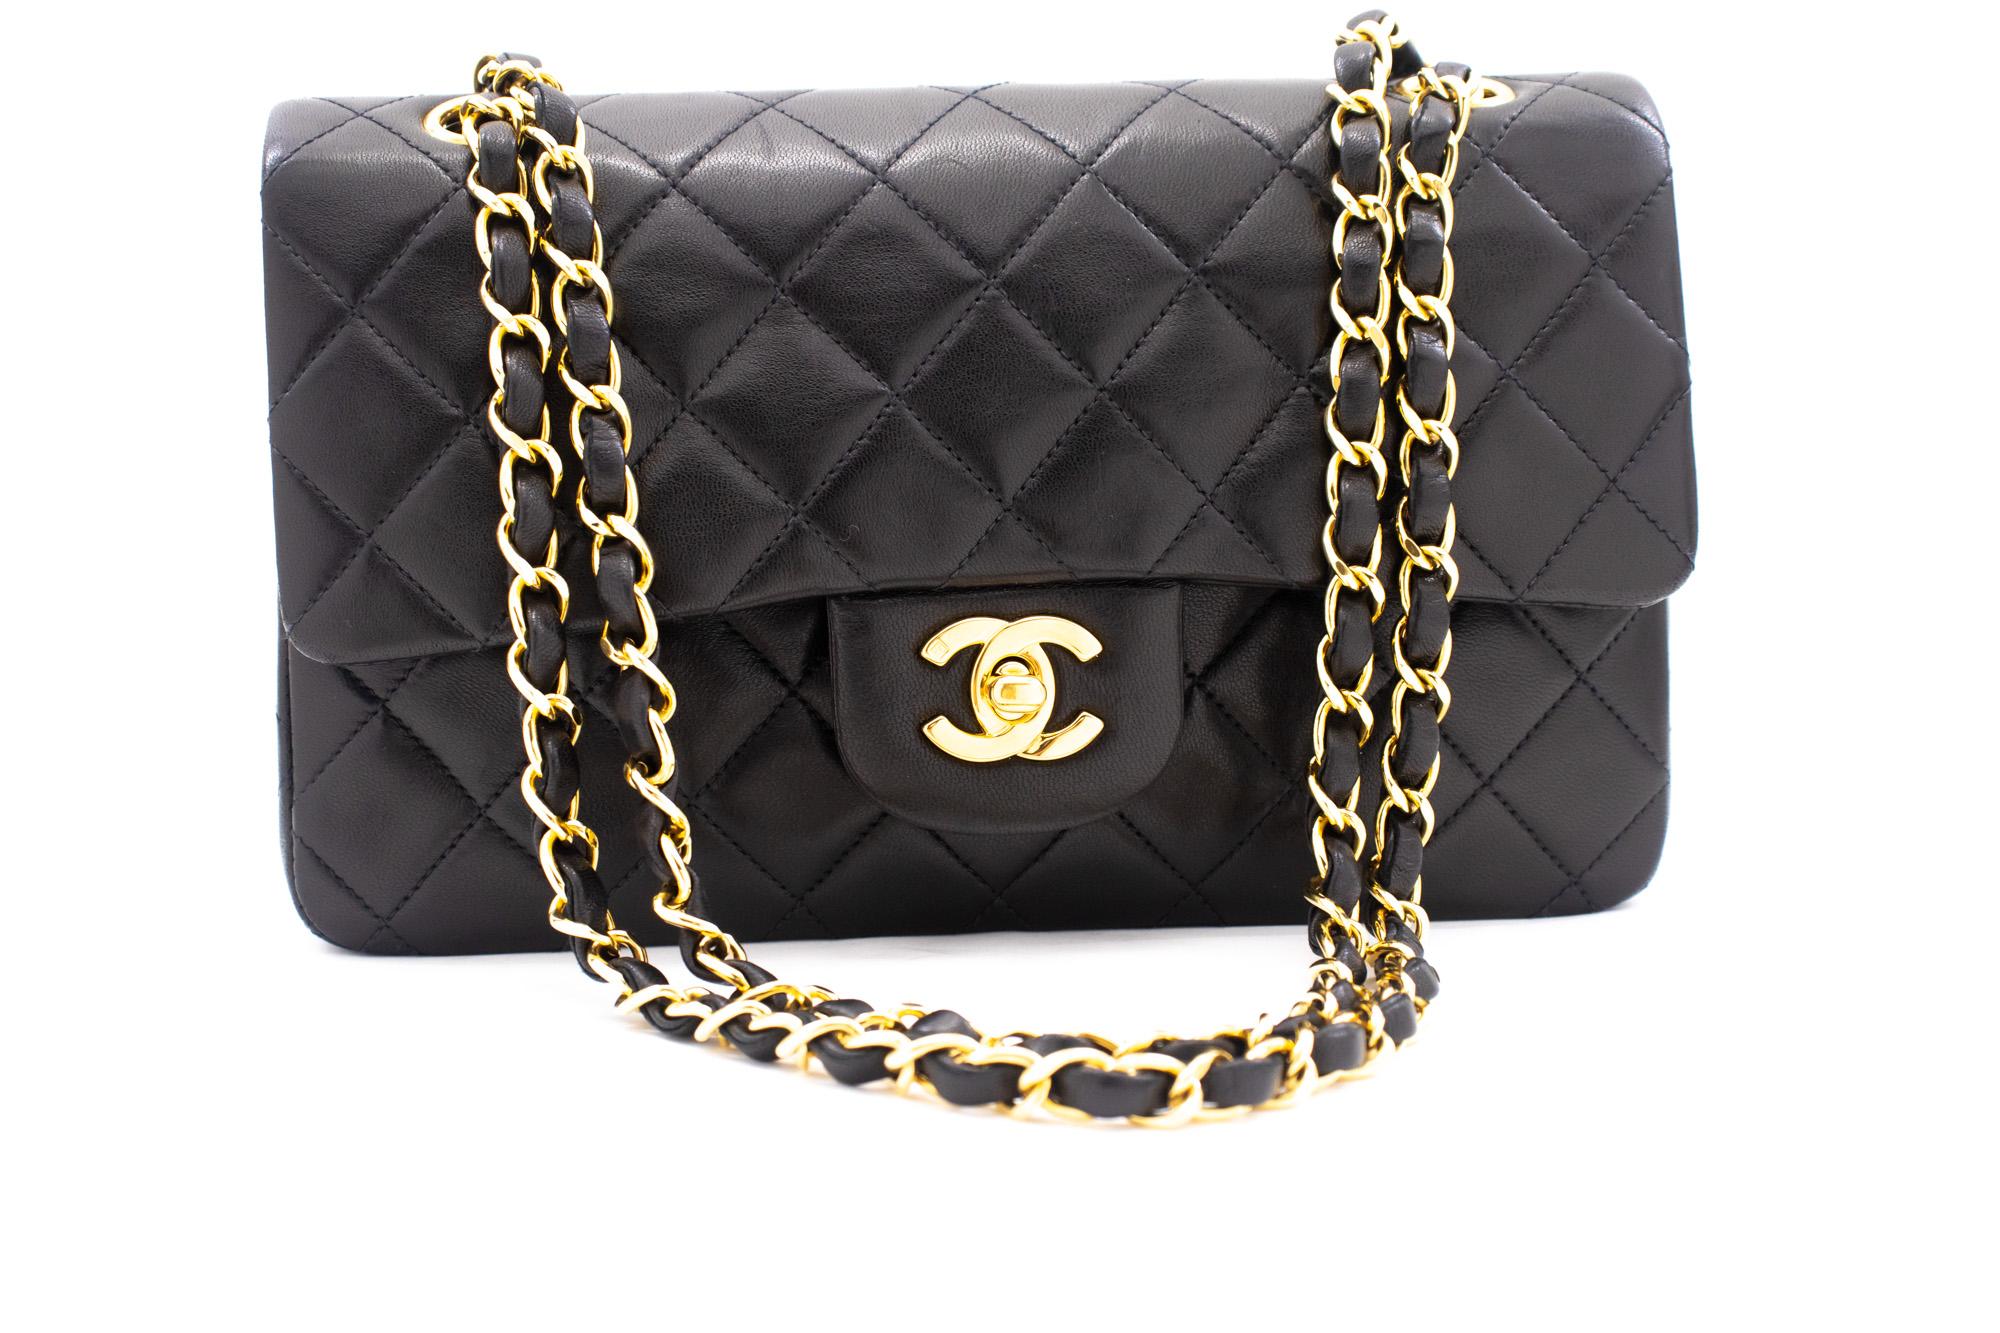 An authentic CHANEL Classic Double Flap 9